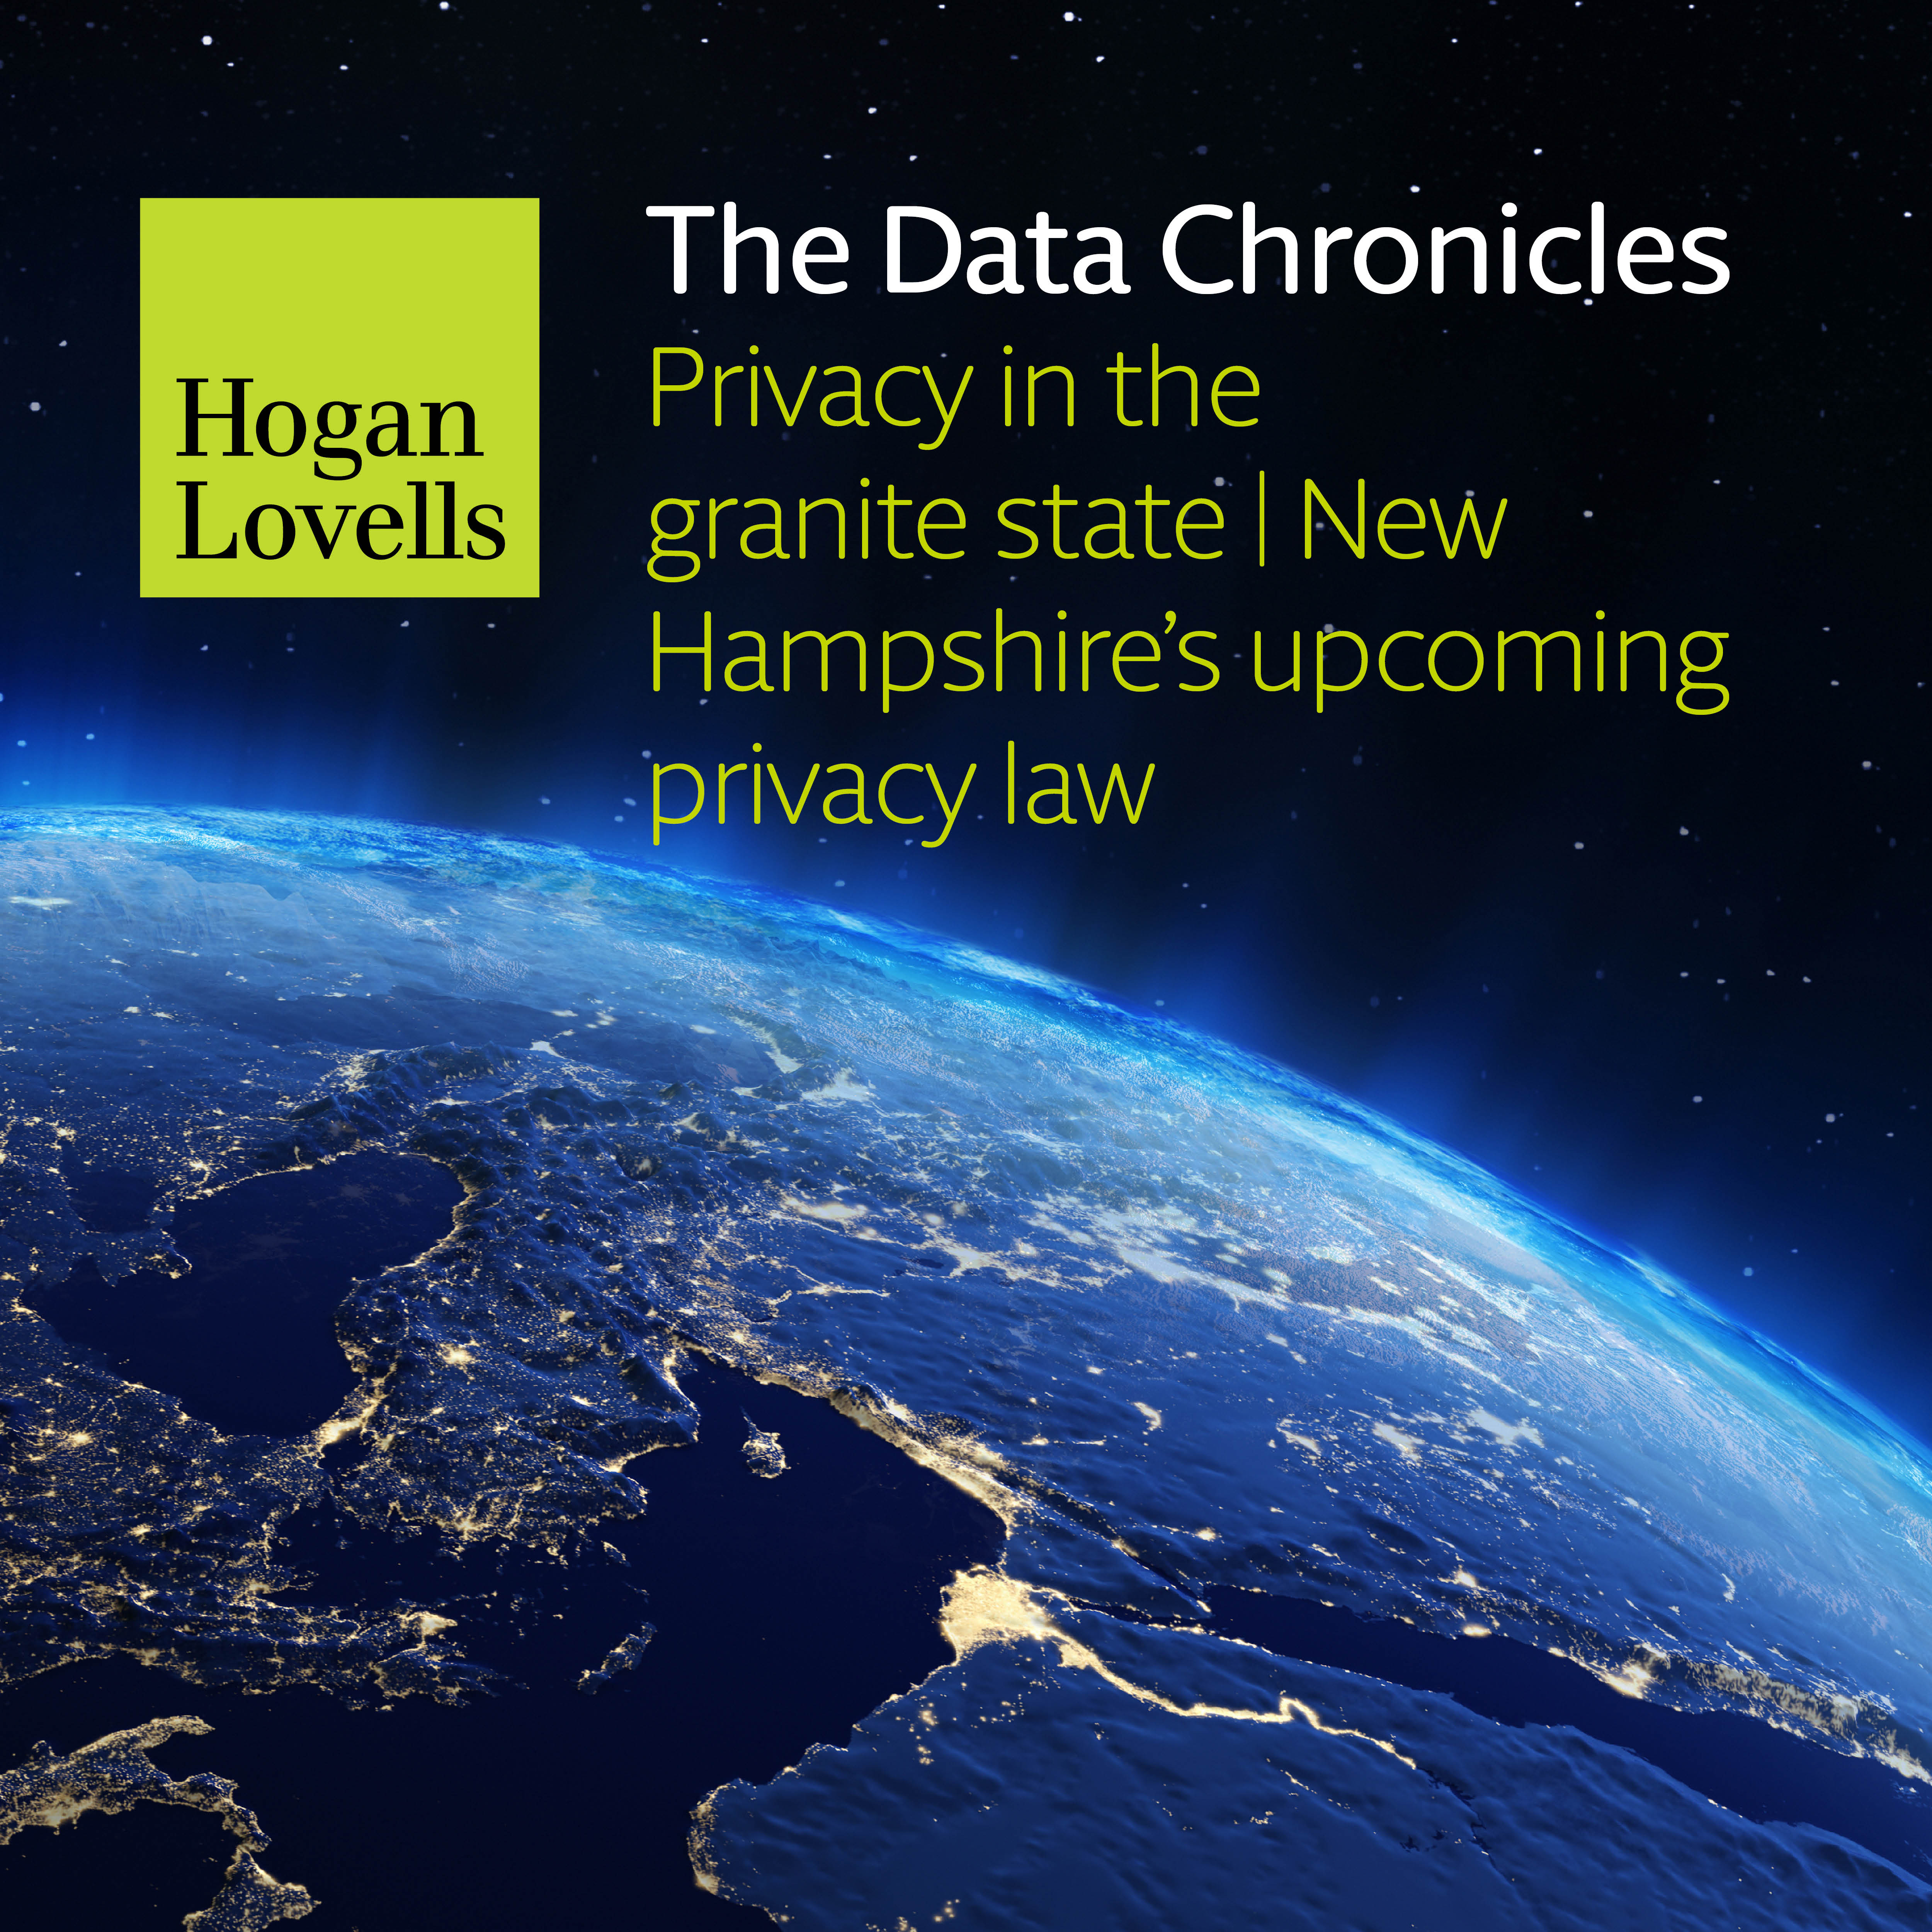 The Data Chronicles_NH privacy law